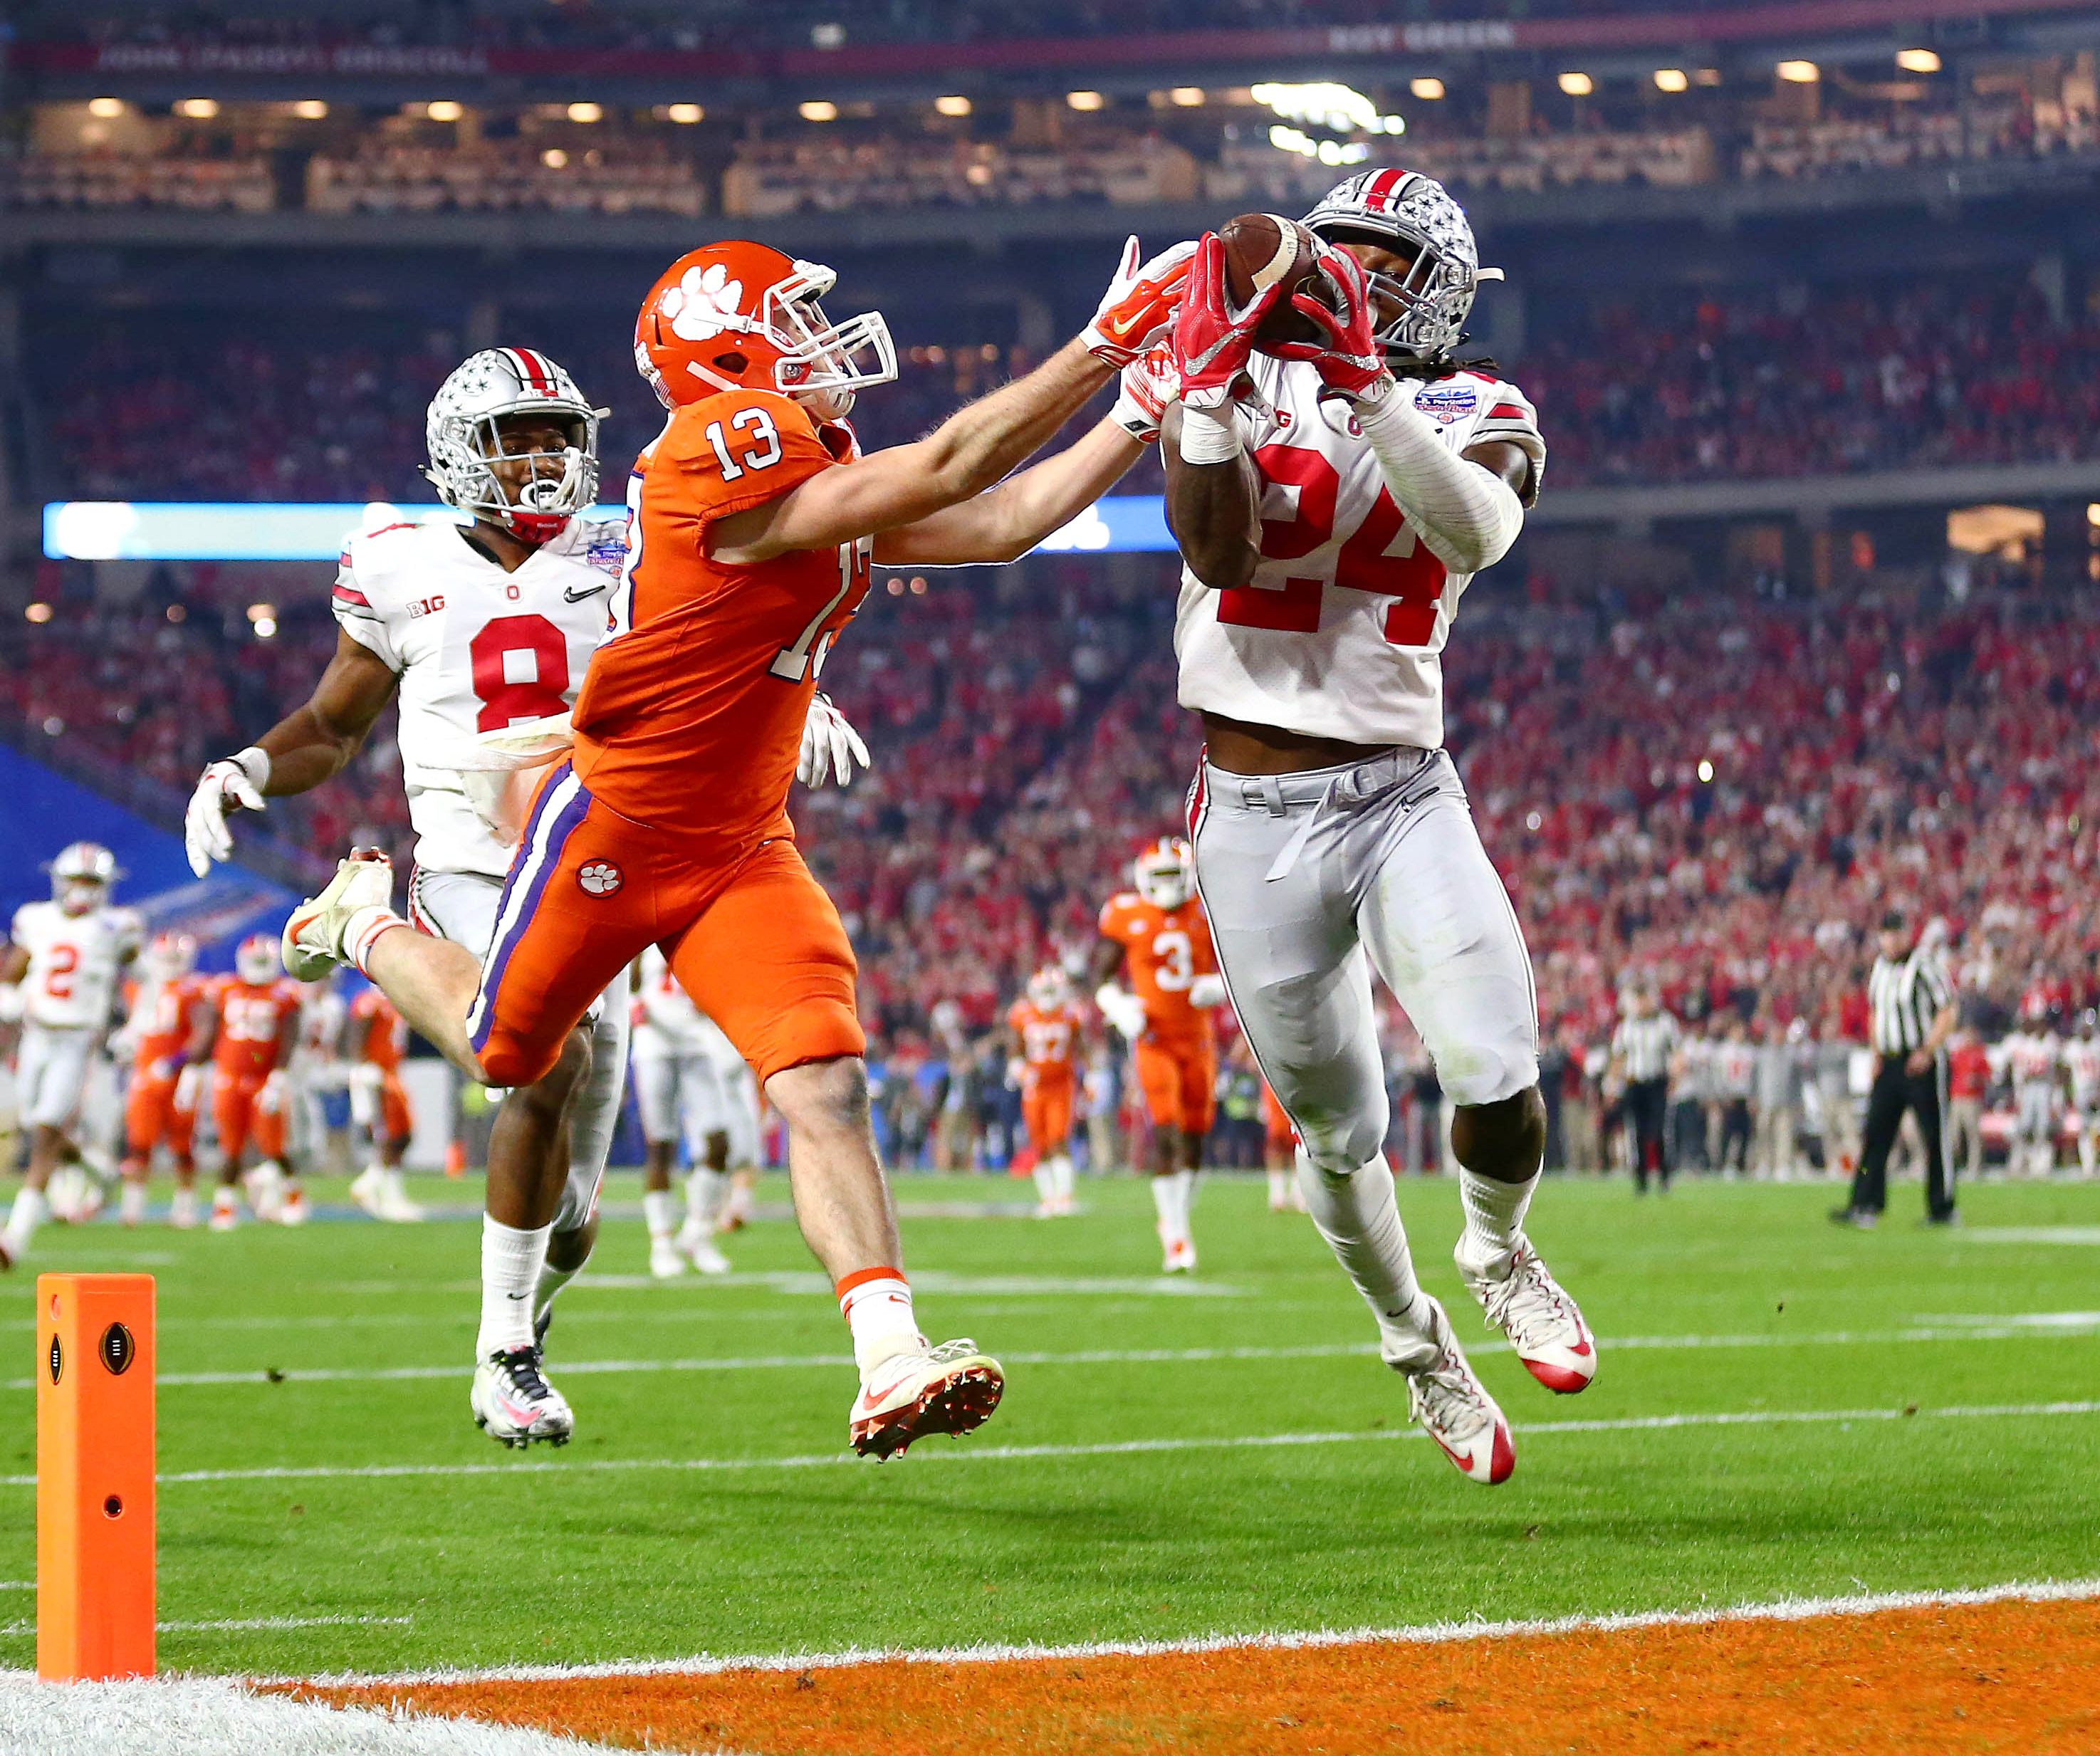 Drive stopper Photos Clemson Tigers vs. Ohio State Buckeyes in the